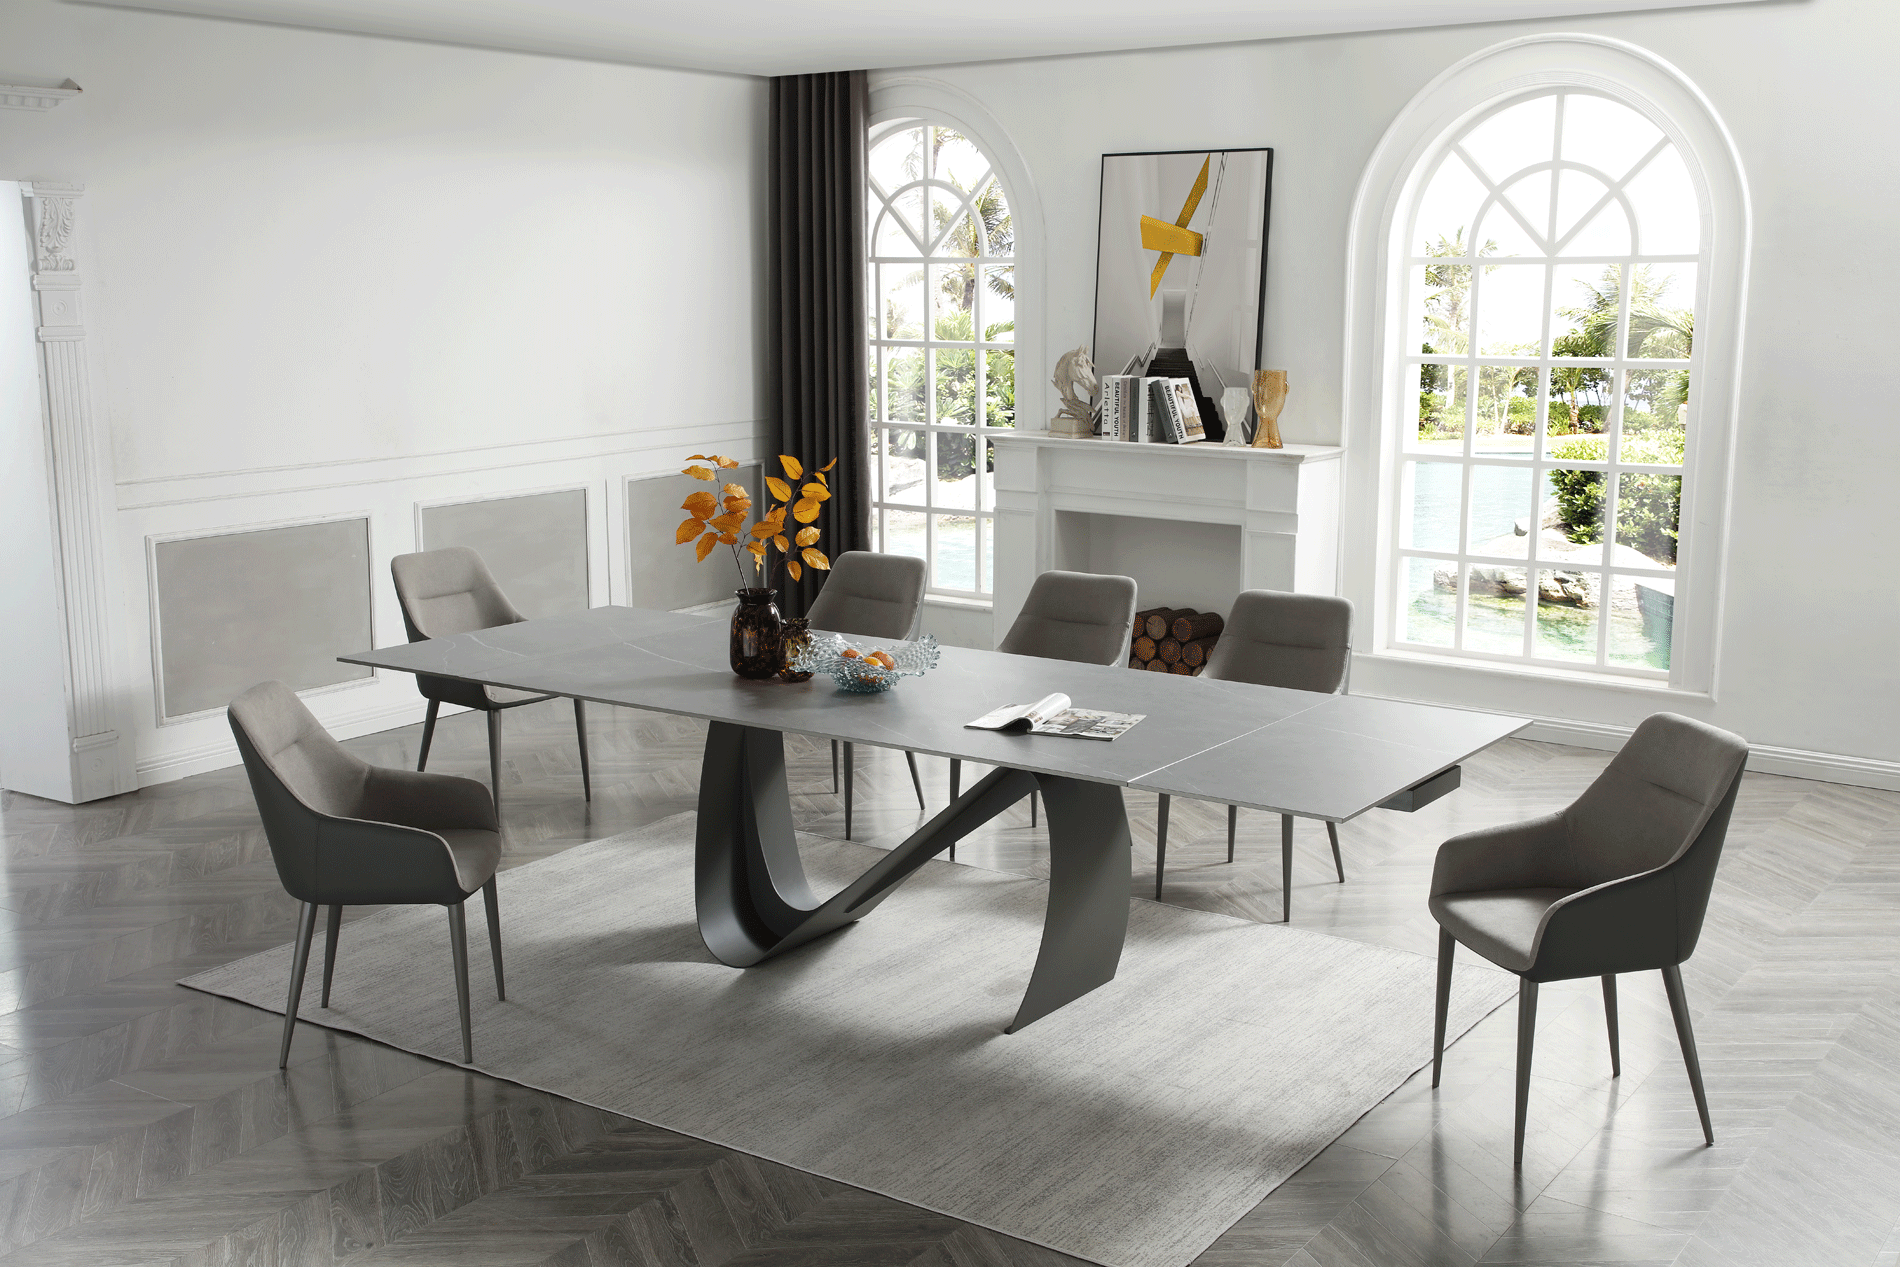 Dining Room Furniture Marble-Look Tables 9087 Table Dark grey with 1254 chairs